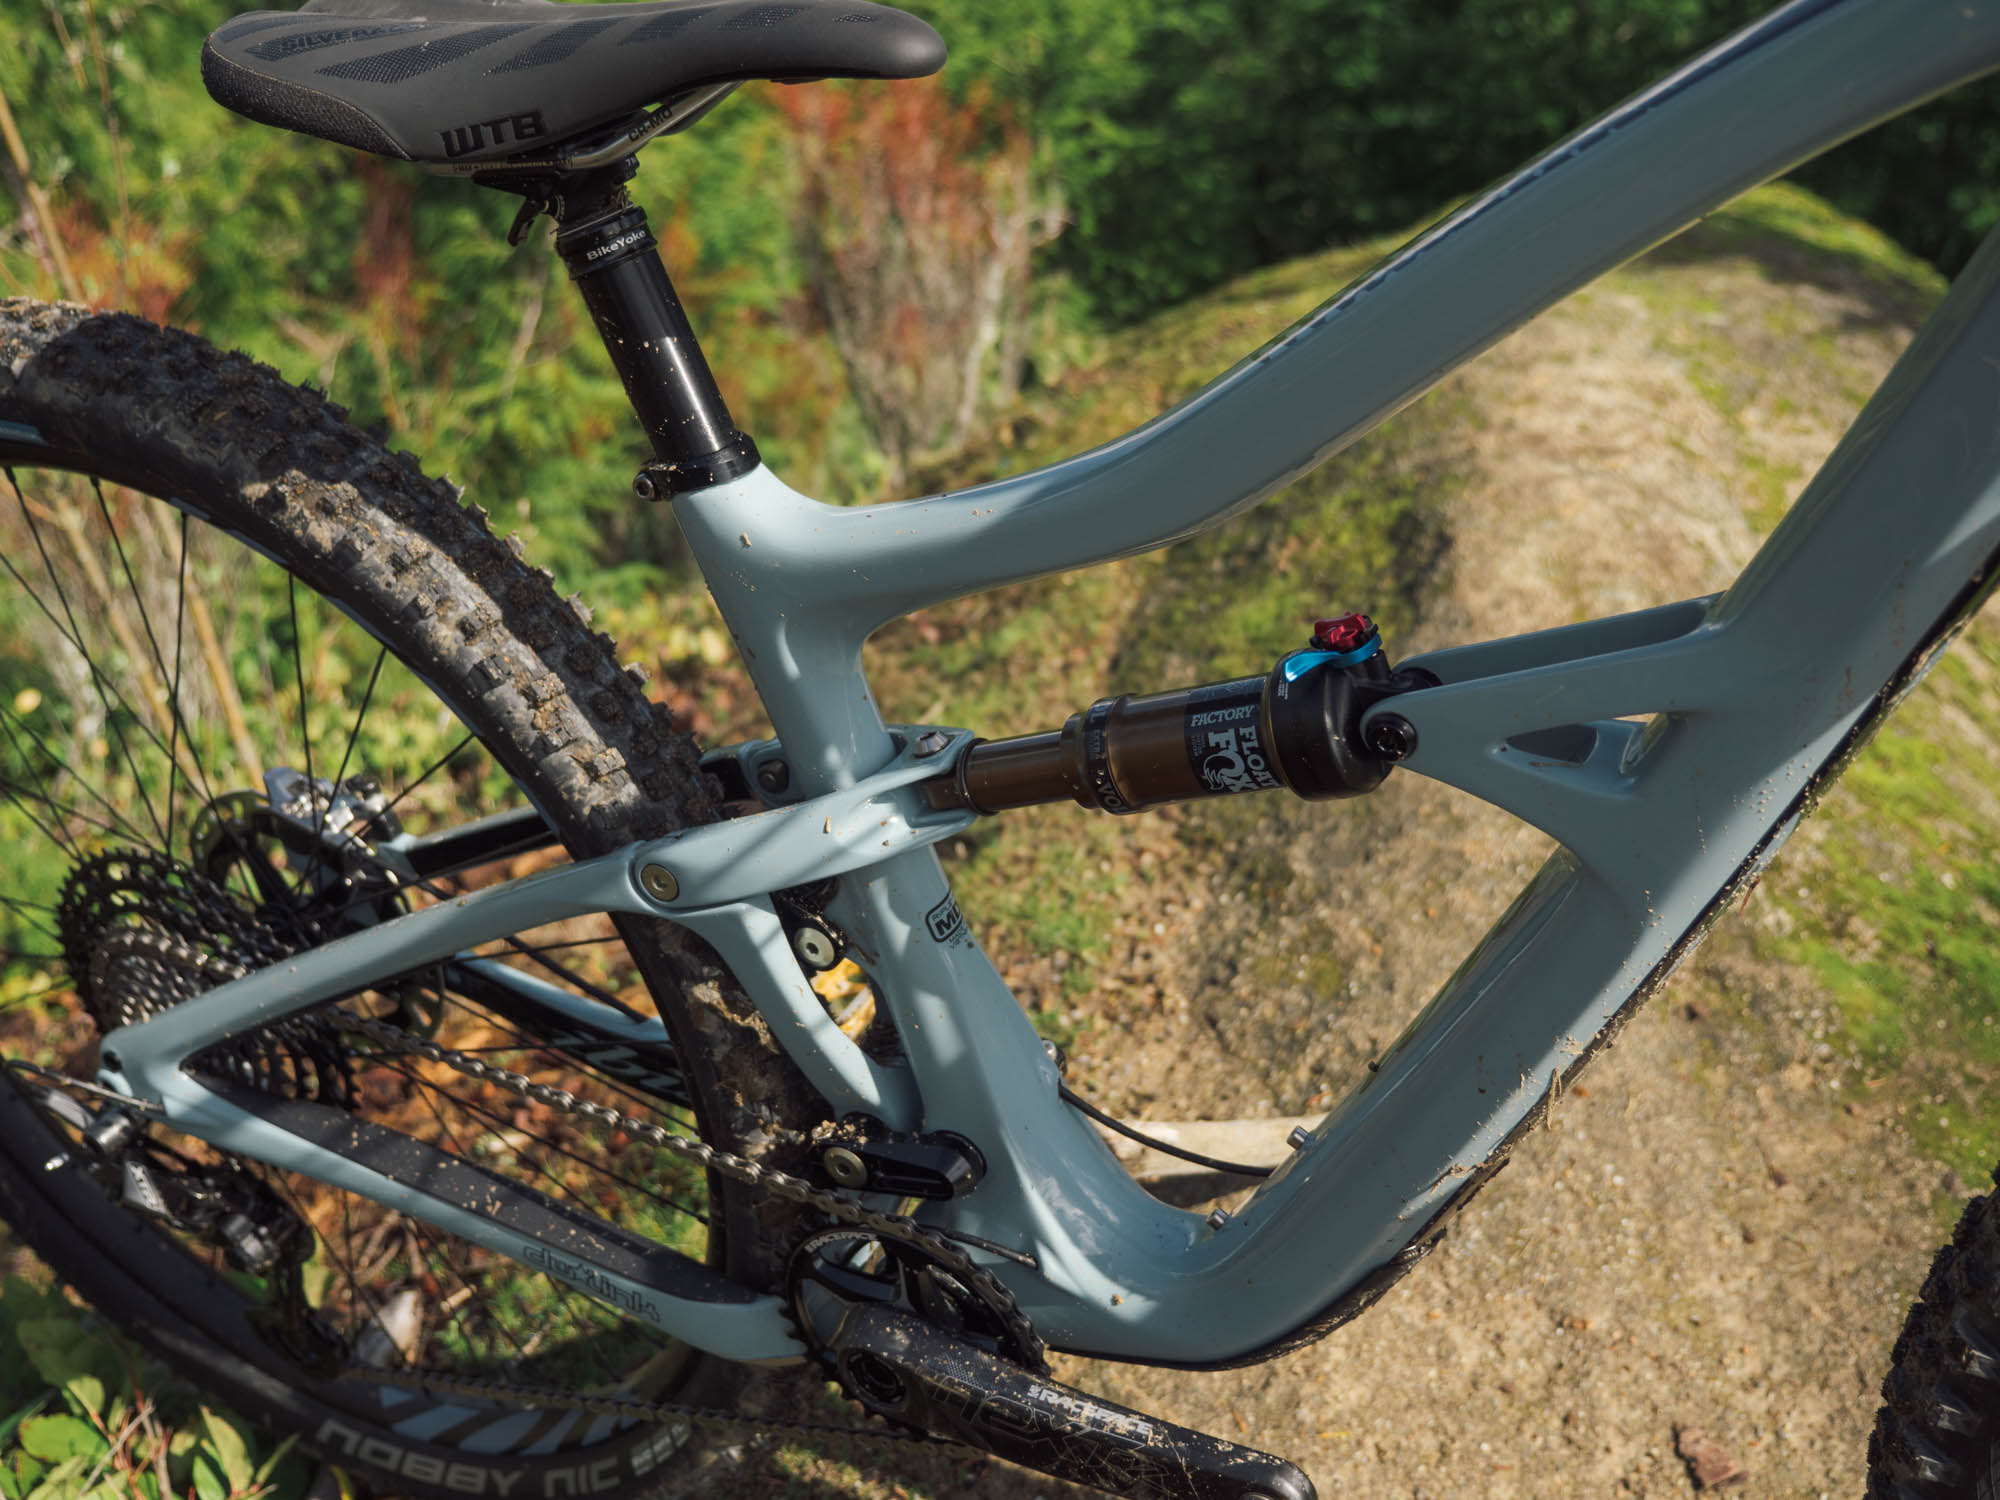 Longer droppers, a snappy rear end, and improved suspension kinematics: all features of the new Ripley